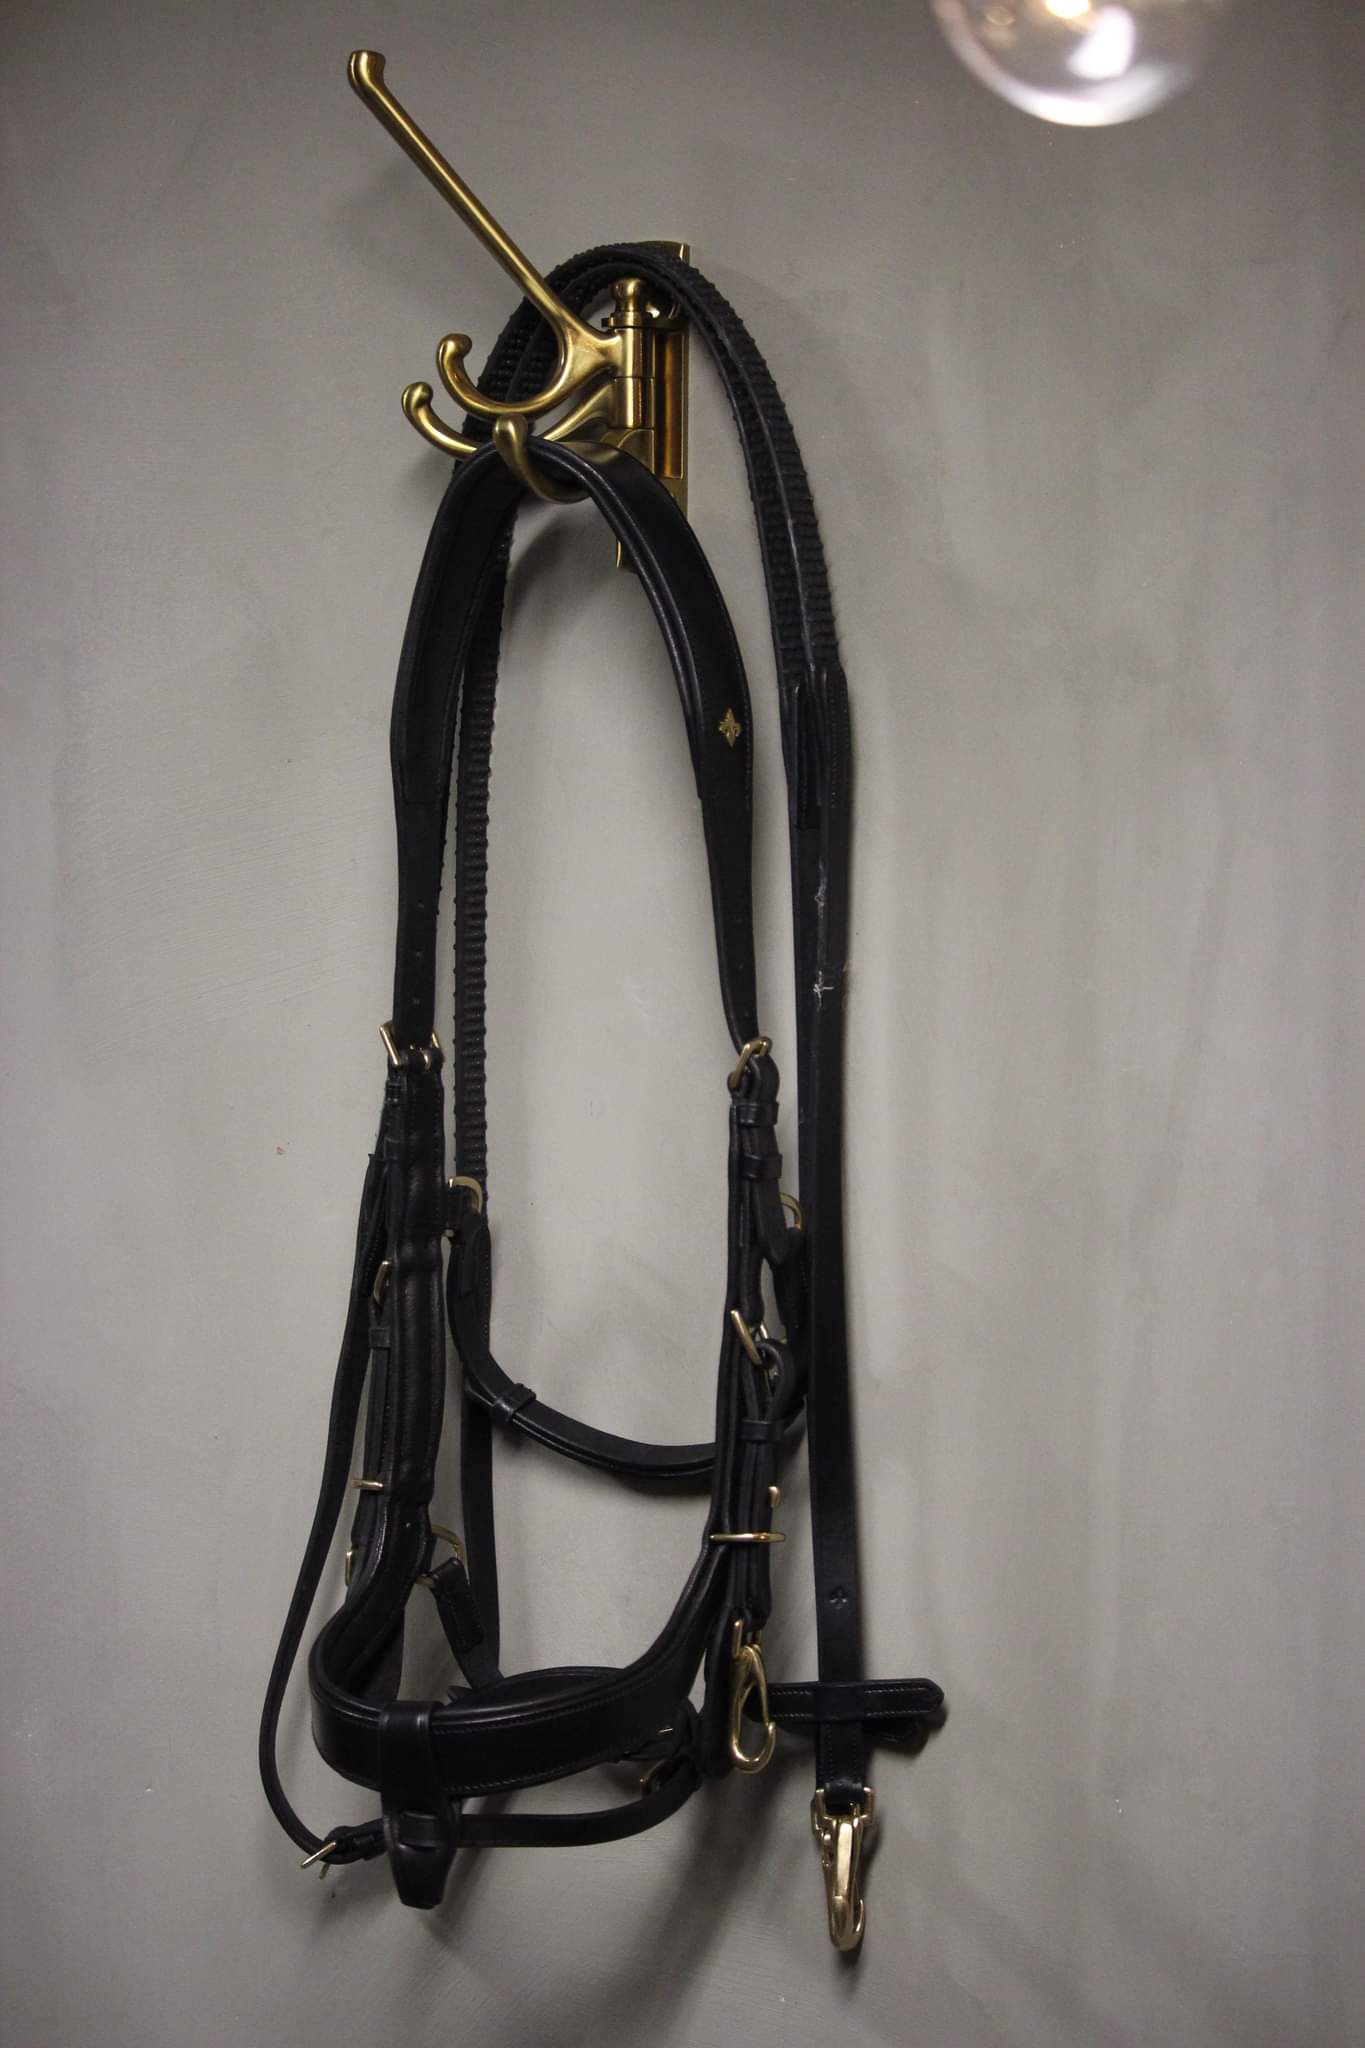 Masego Horsewear Italian Leather Lily Multi-Bridle - Equiluxe Tack